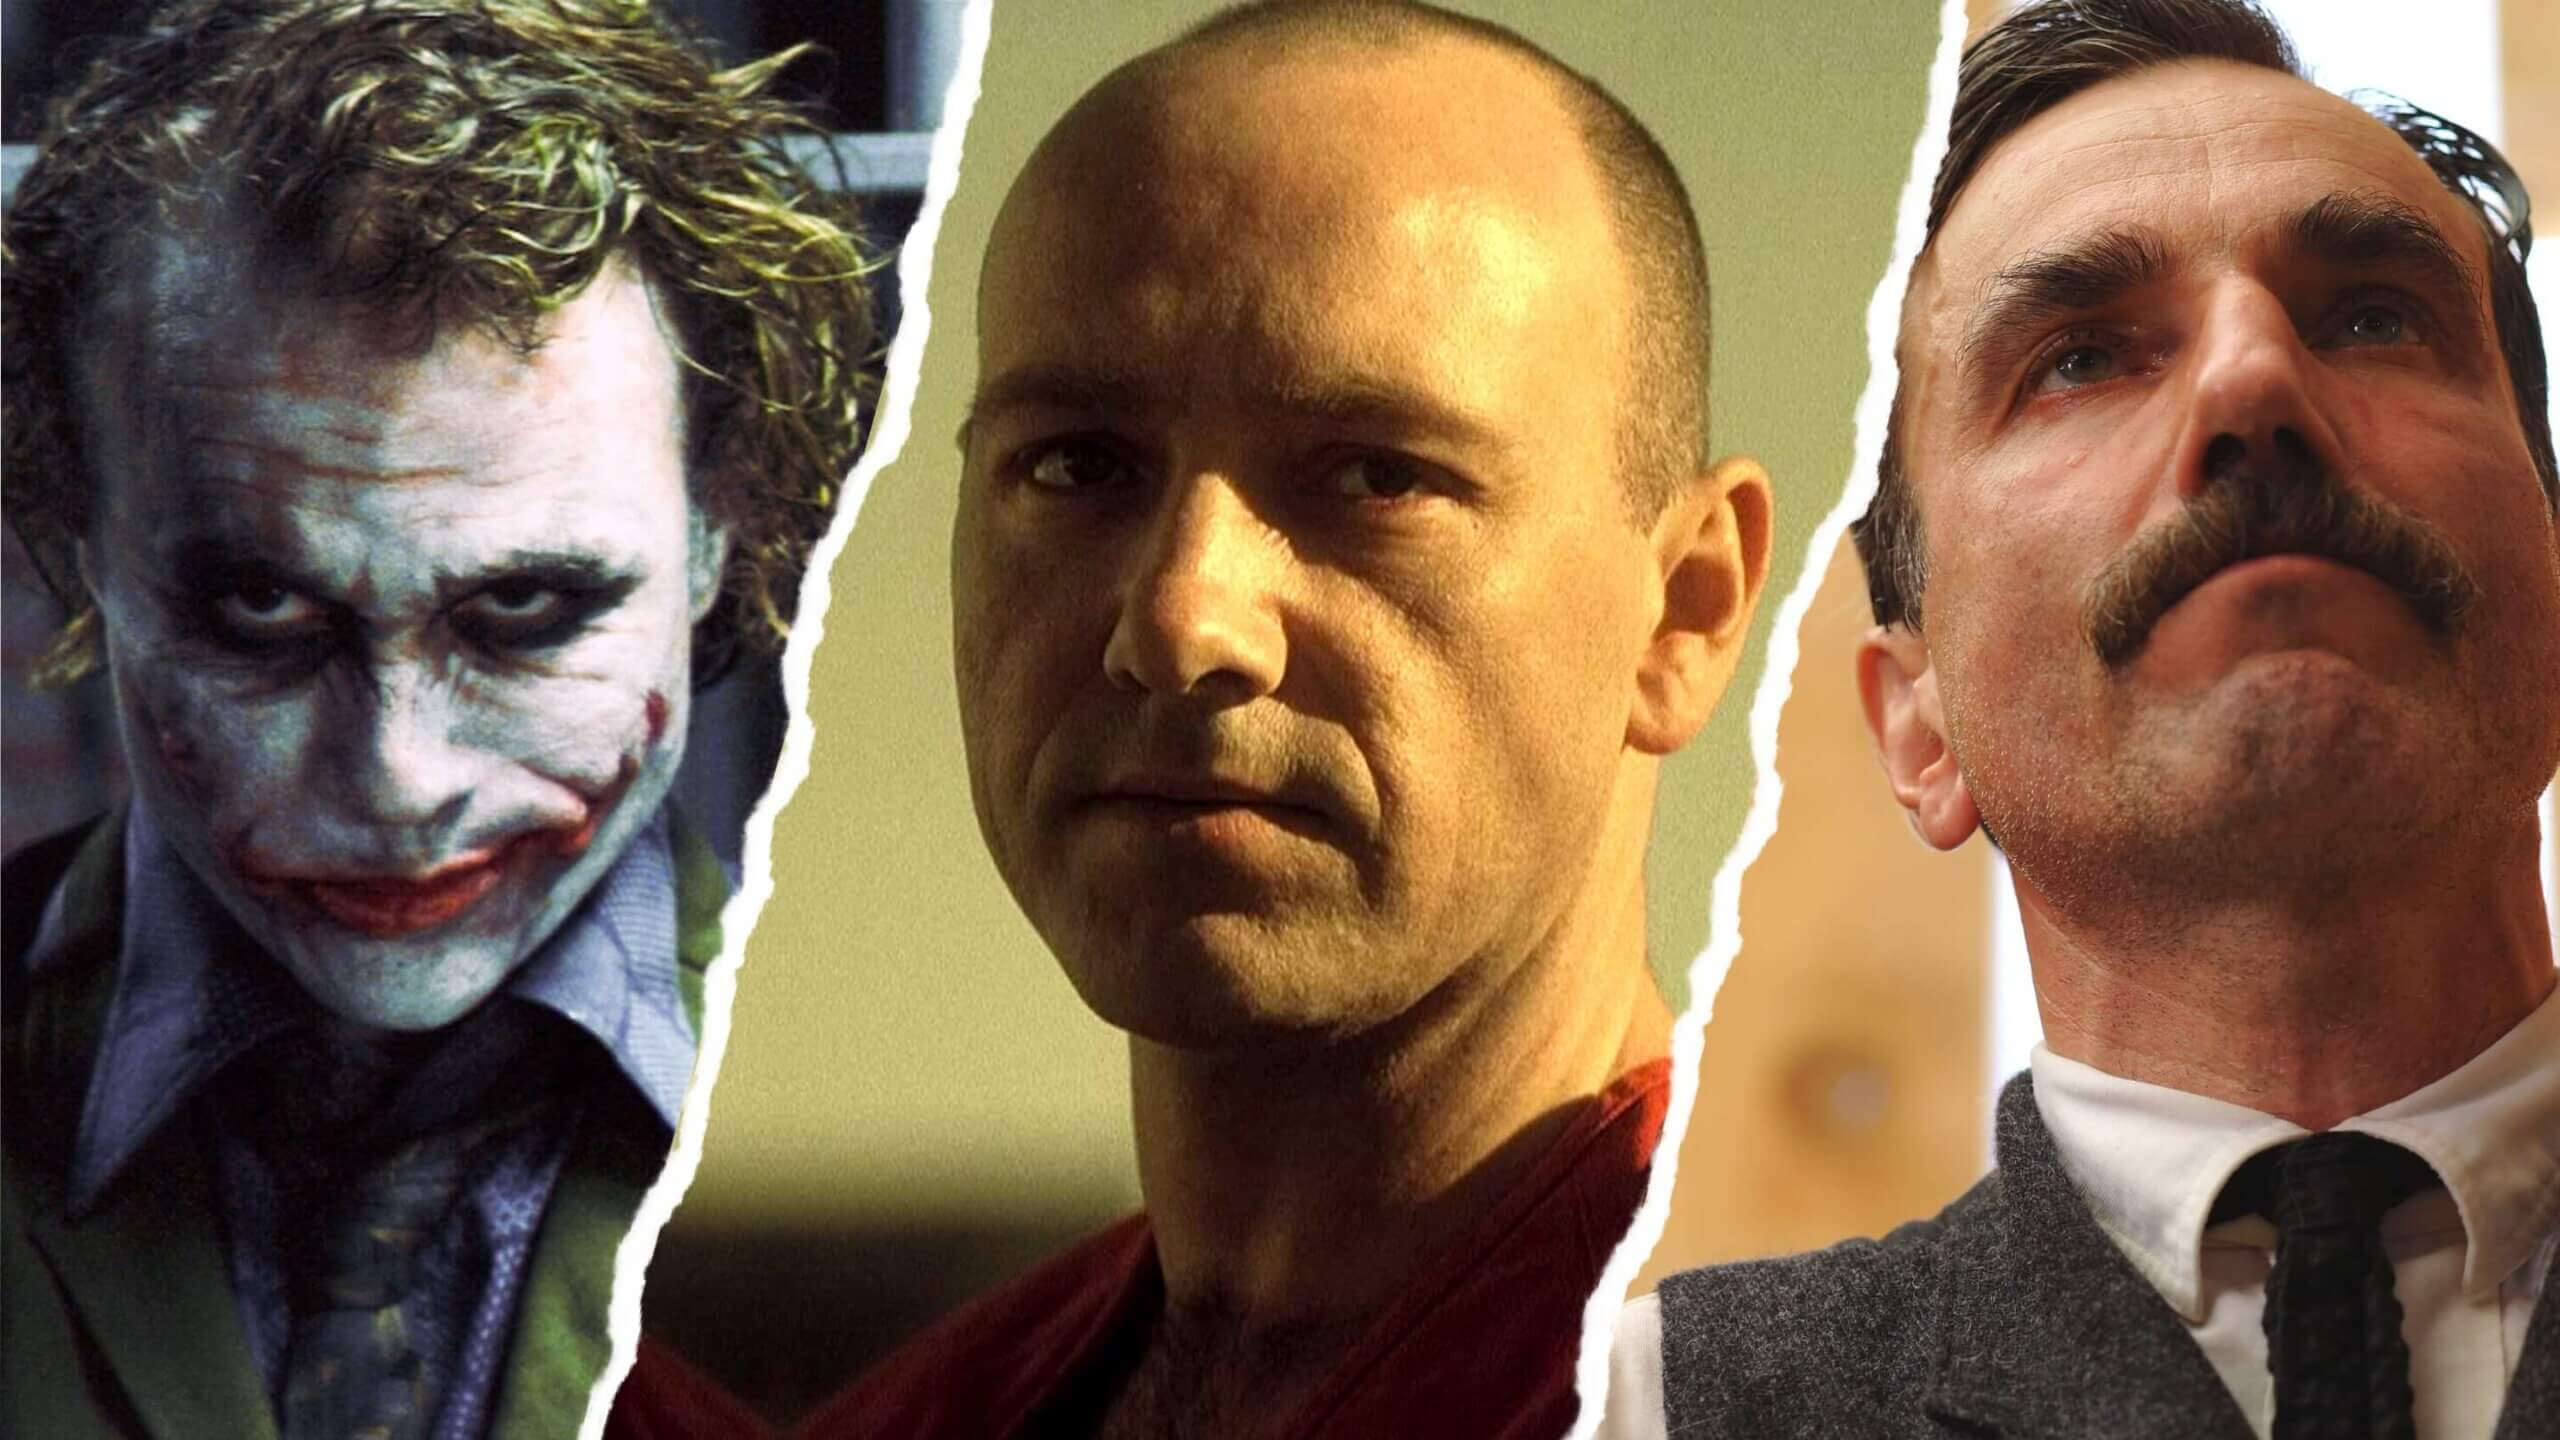 Find Out About Which Villain is the Most Difficult to Win as in